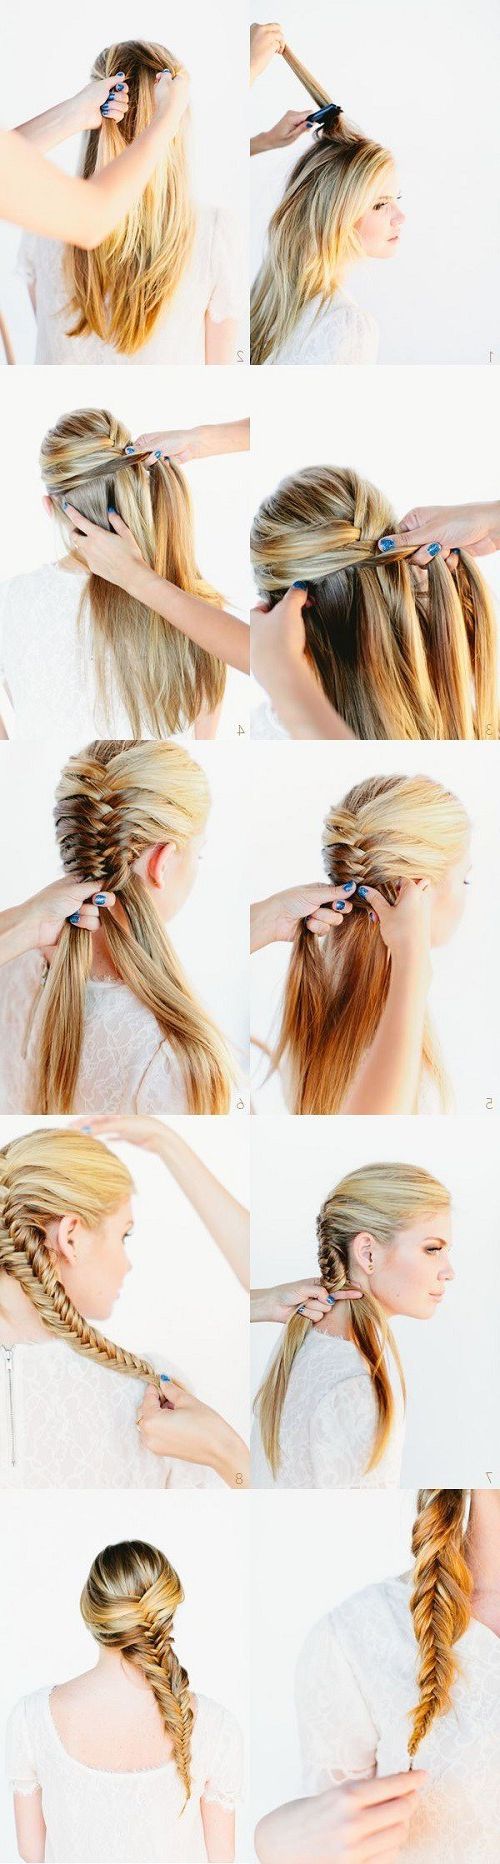 20 Easy Elegant Step By Step Hair Tutorials For Long Inside Most Up To Date Loosely Tied Braid Hairstyles With A Ribbon (Gallery 20 of 20)